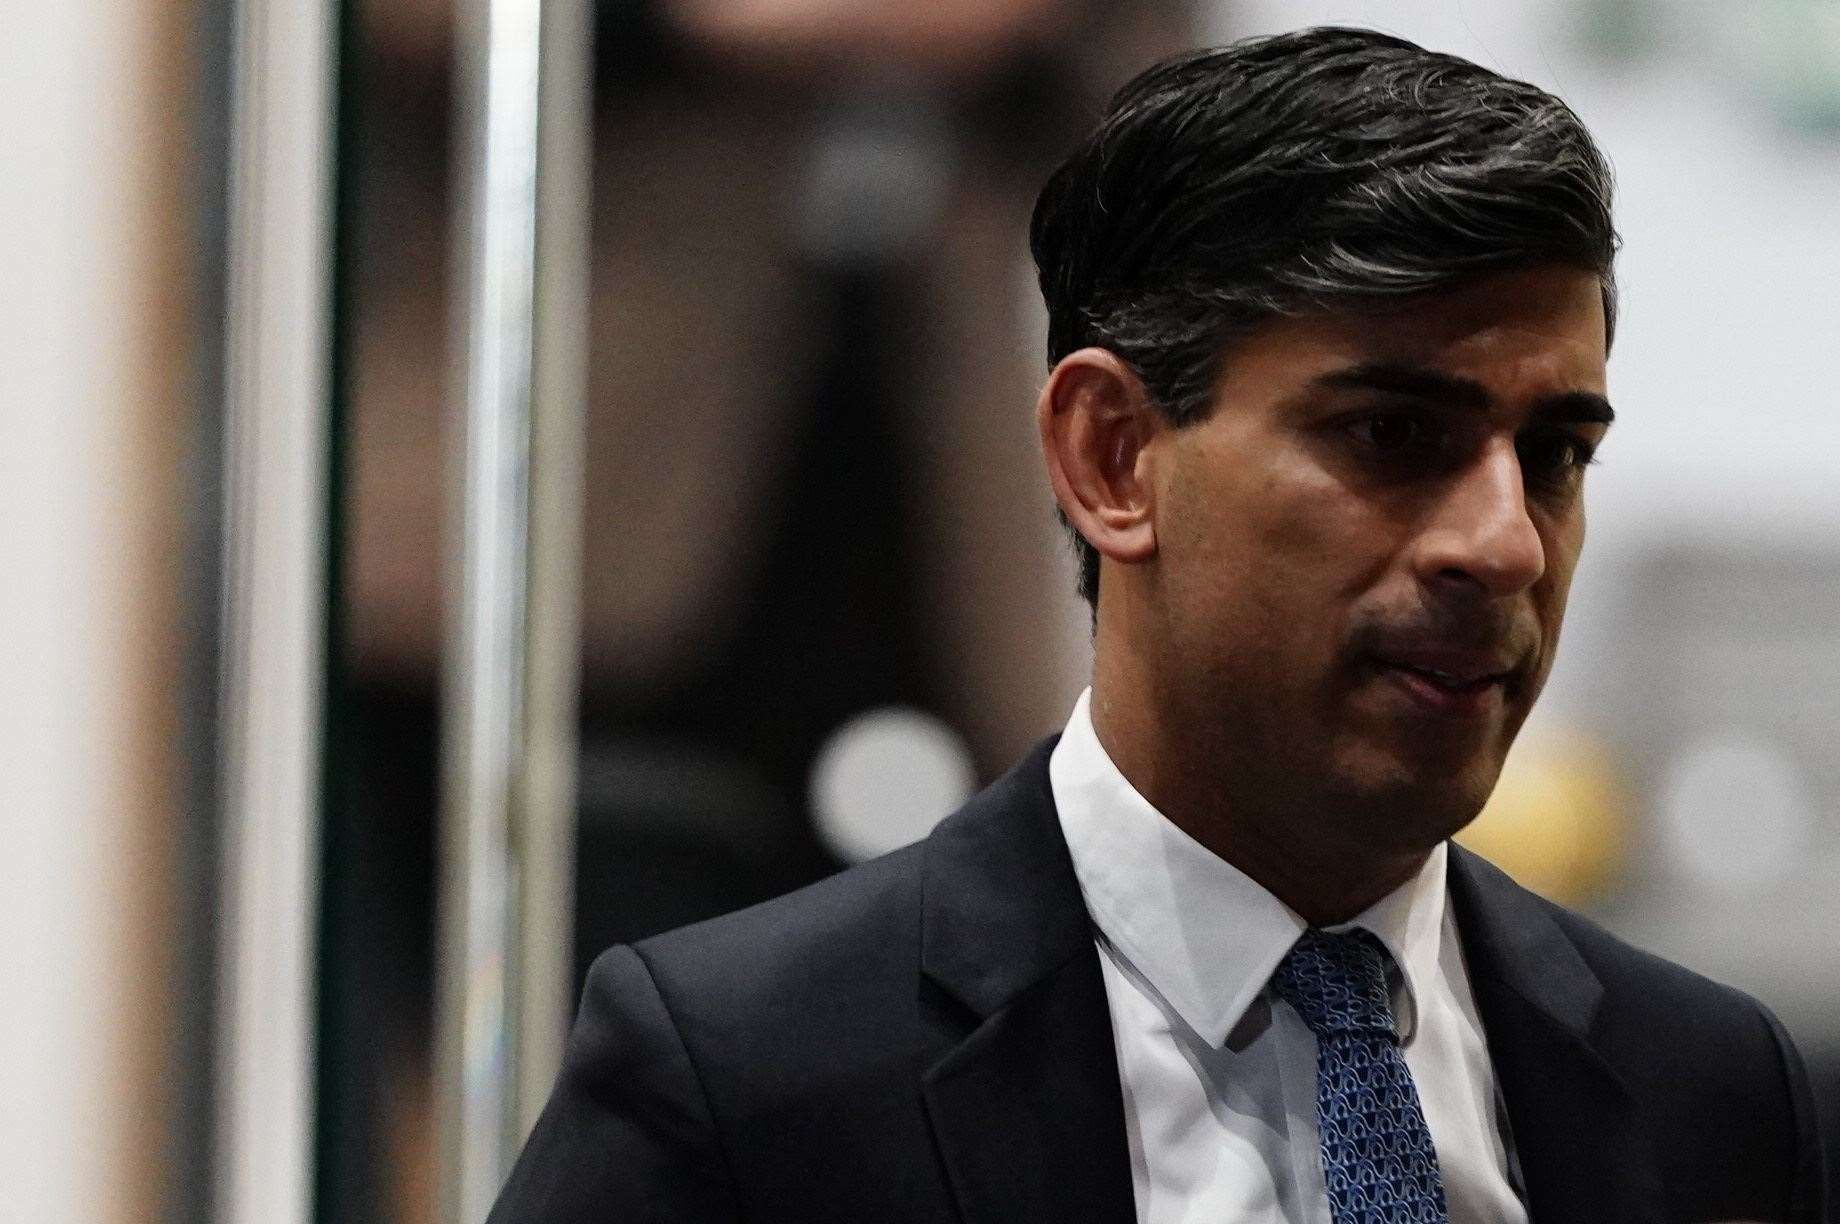 Rishi Sunak has staked his reputation on a pledge to deliver the “people’s priorities”.